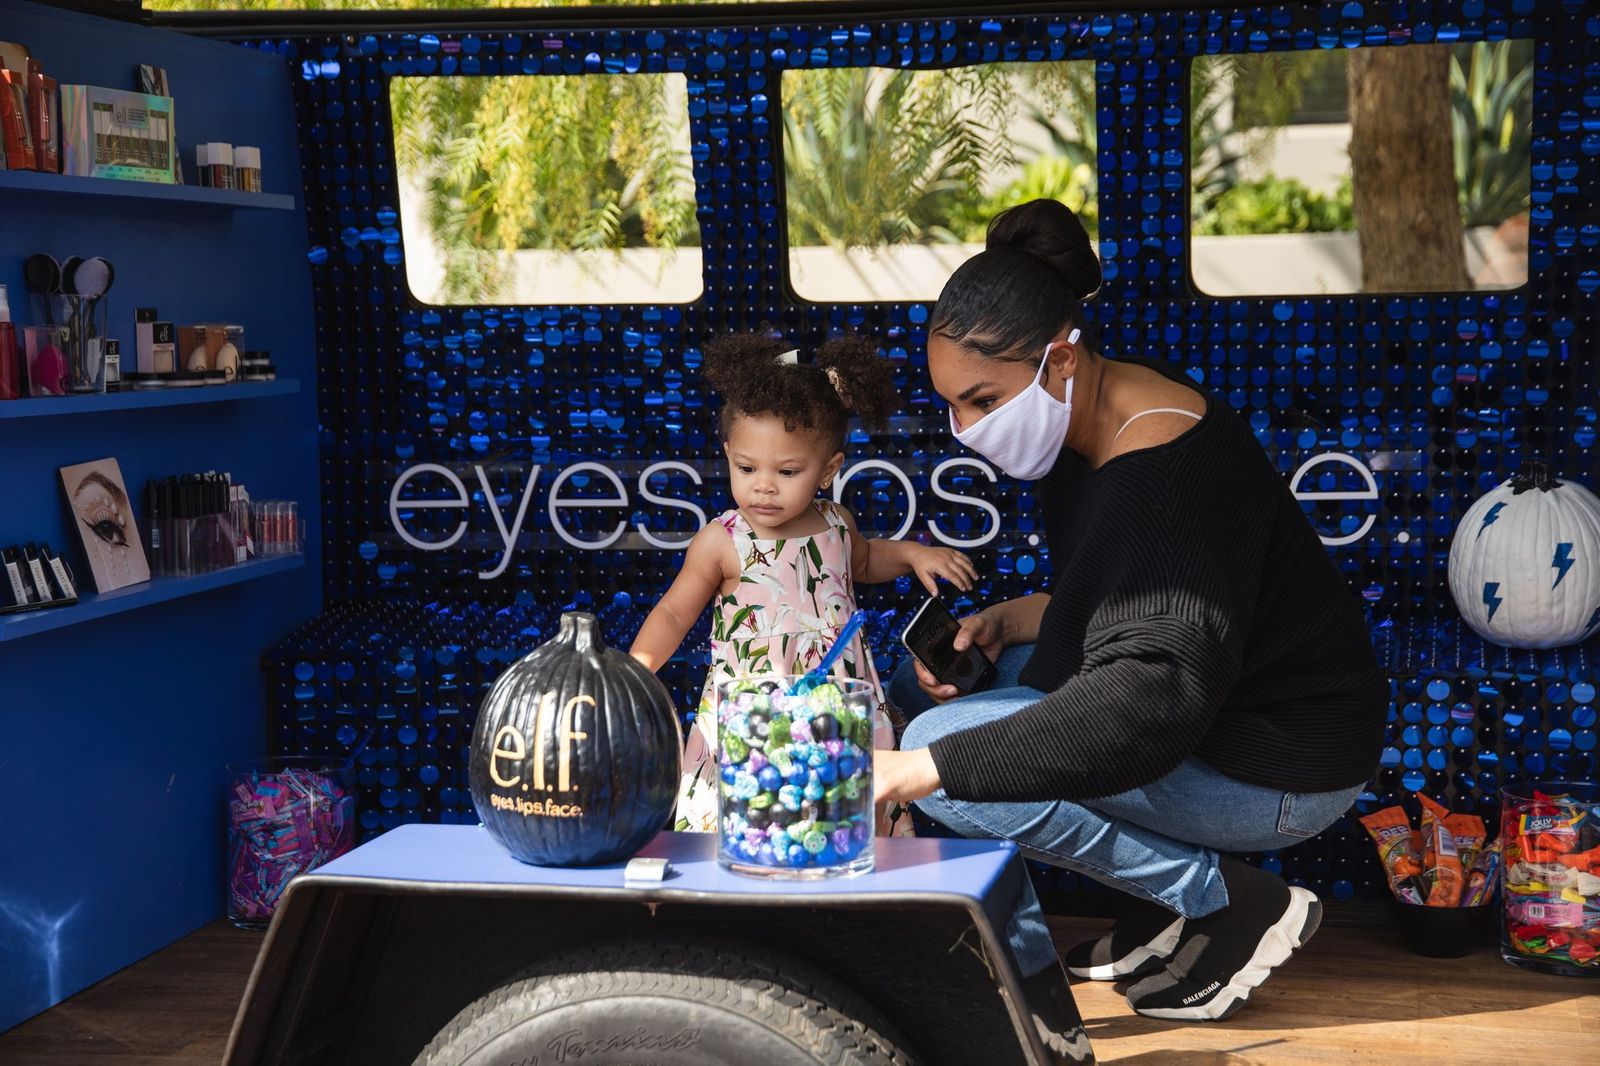 female presenting person wearing white mask with young female presenting child, sitting inside pop-up vehicle with purple sparkly wall behind her with the words "eyes lips face" in white.